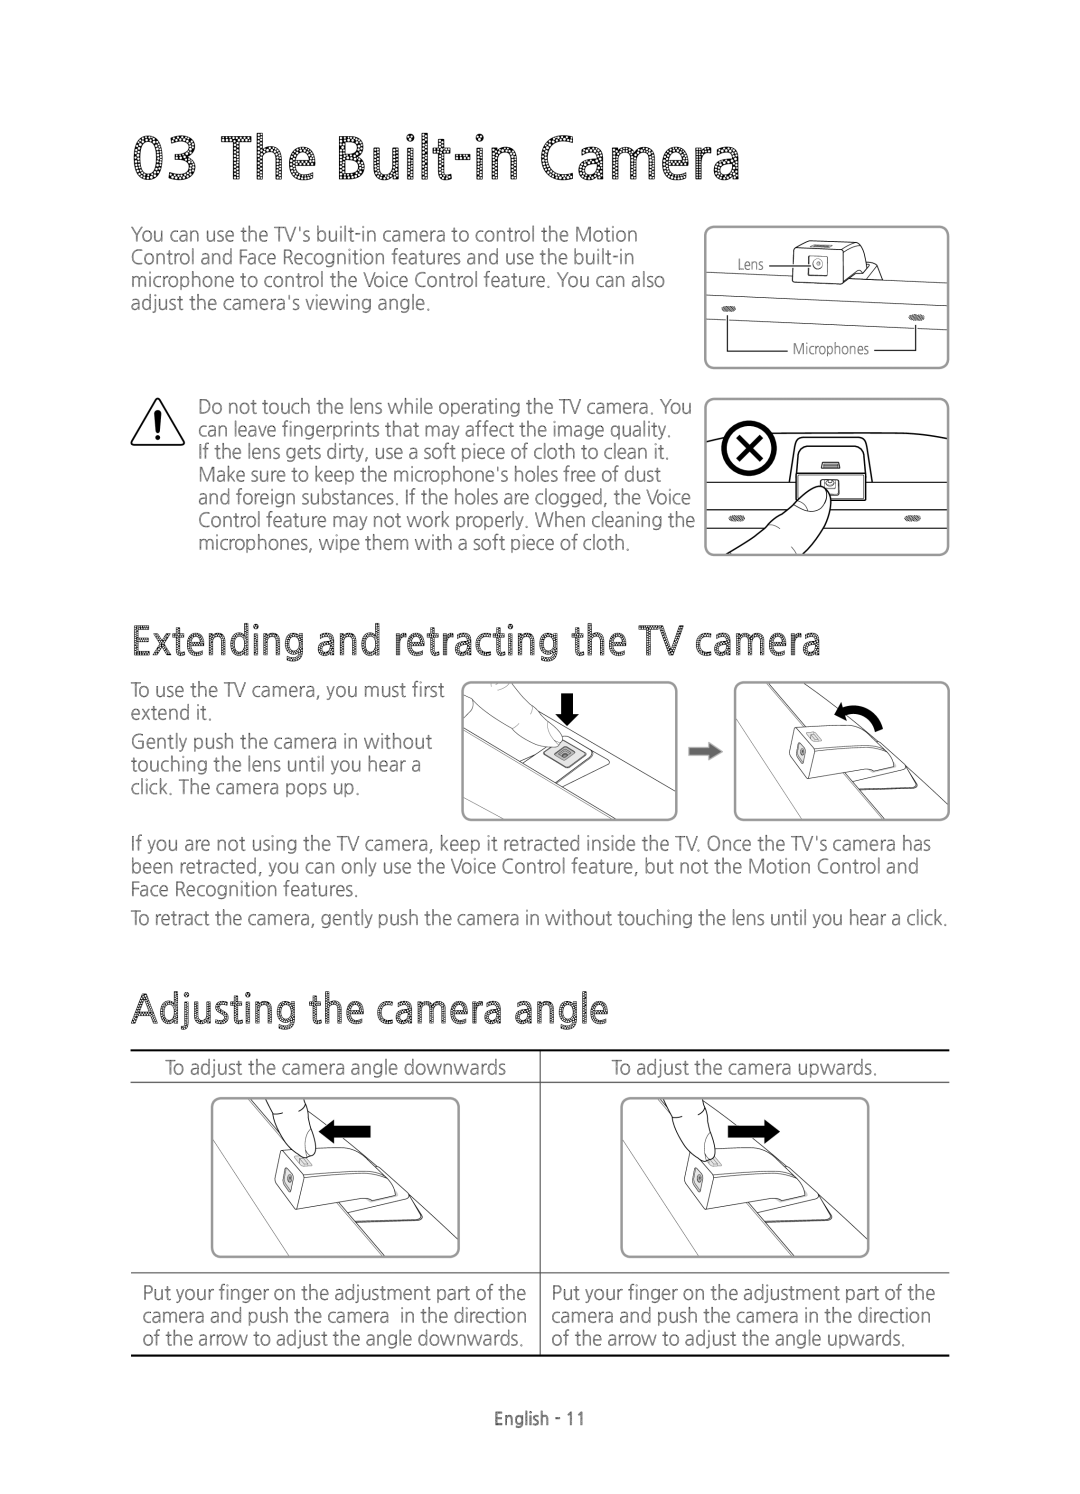 Samsung UE65JS9500TXXU manual The Built-in Camera, Extending and retracting the TV camera, Adjusting the camera angle 